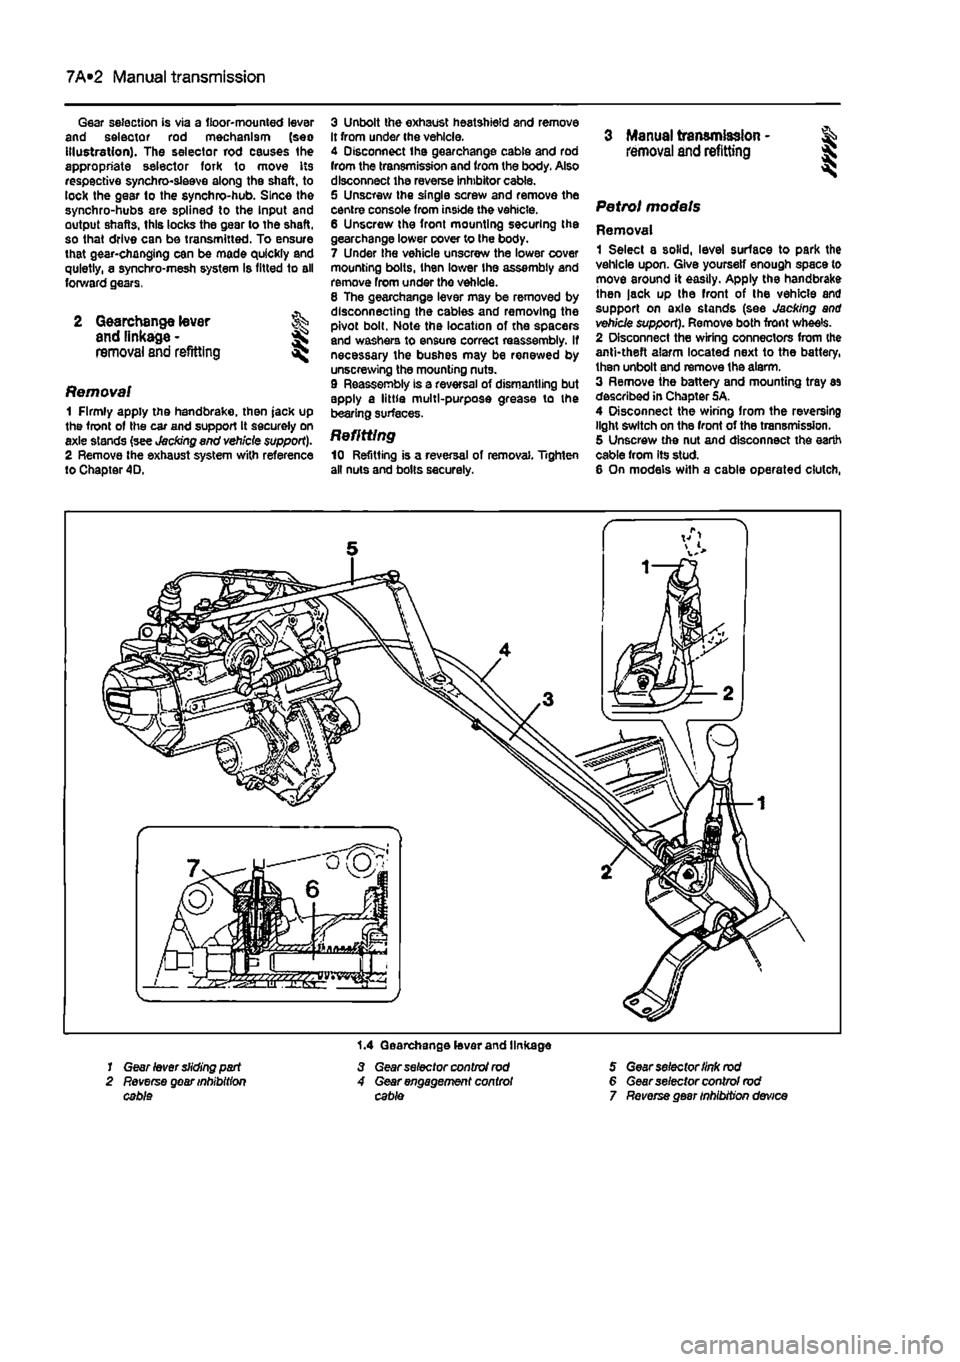 FIAT PUNTO 1996 176 / 1.G Owners Guide 
7A*2 Manual transmission 
Gear selection is via a floor-mounted lever and selector rod mechanism (seo Illustration). The selector rod causes the appropriate selector fork to move its respective synch